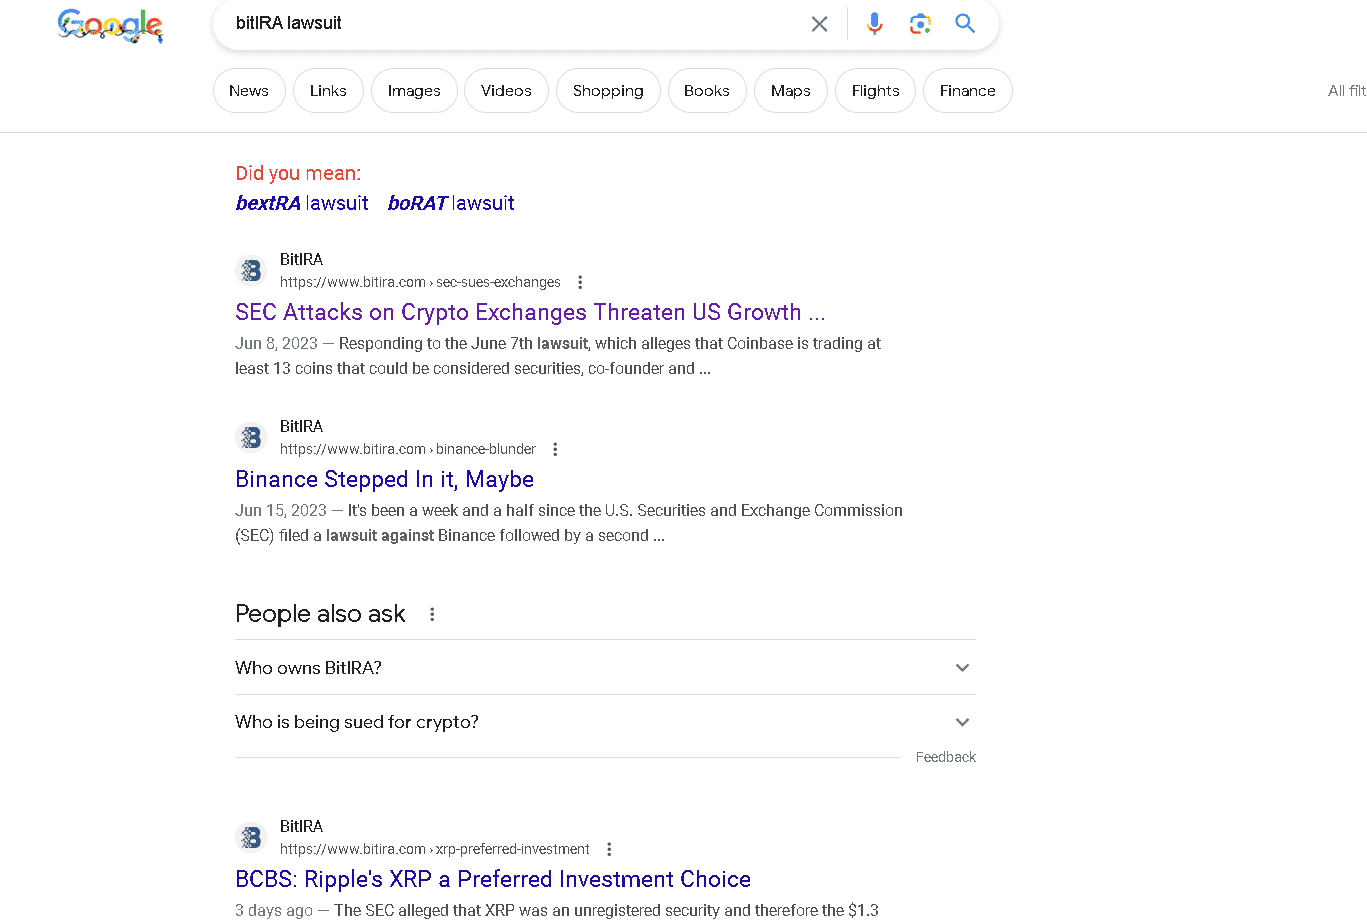 No results on Google for the query "BitIRA lawsuit"